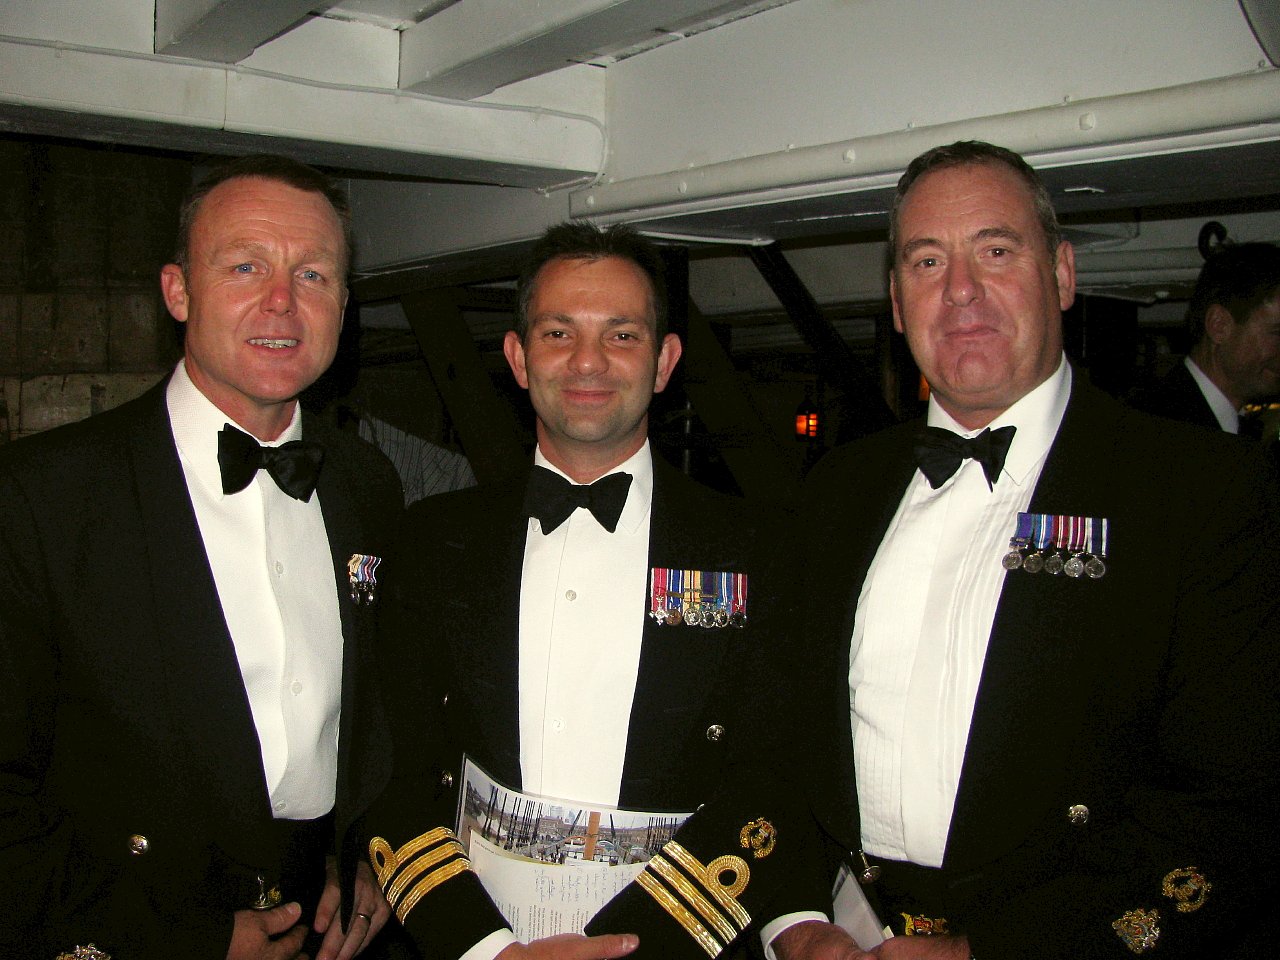 Project+Vernon+charity+dinner+on+board+HMS+Victory+11+Sep+2014+(105).jpg